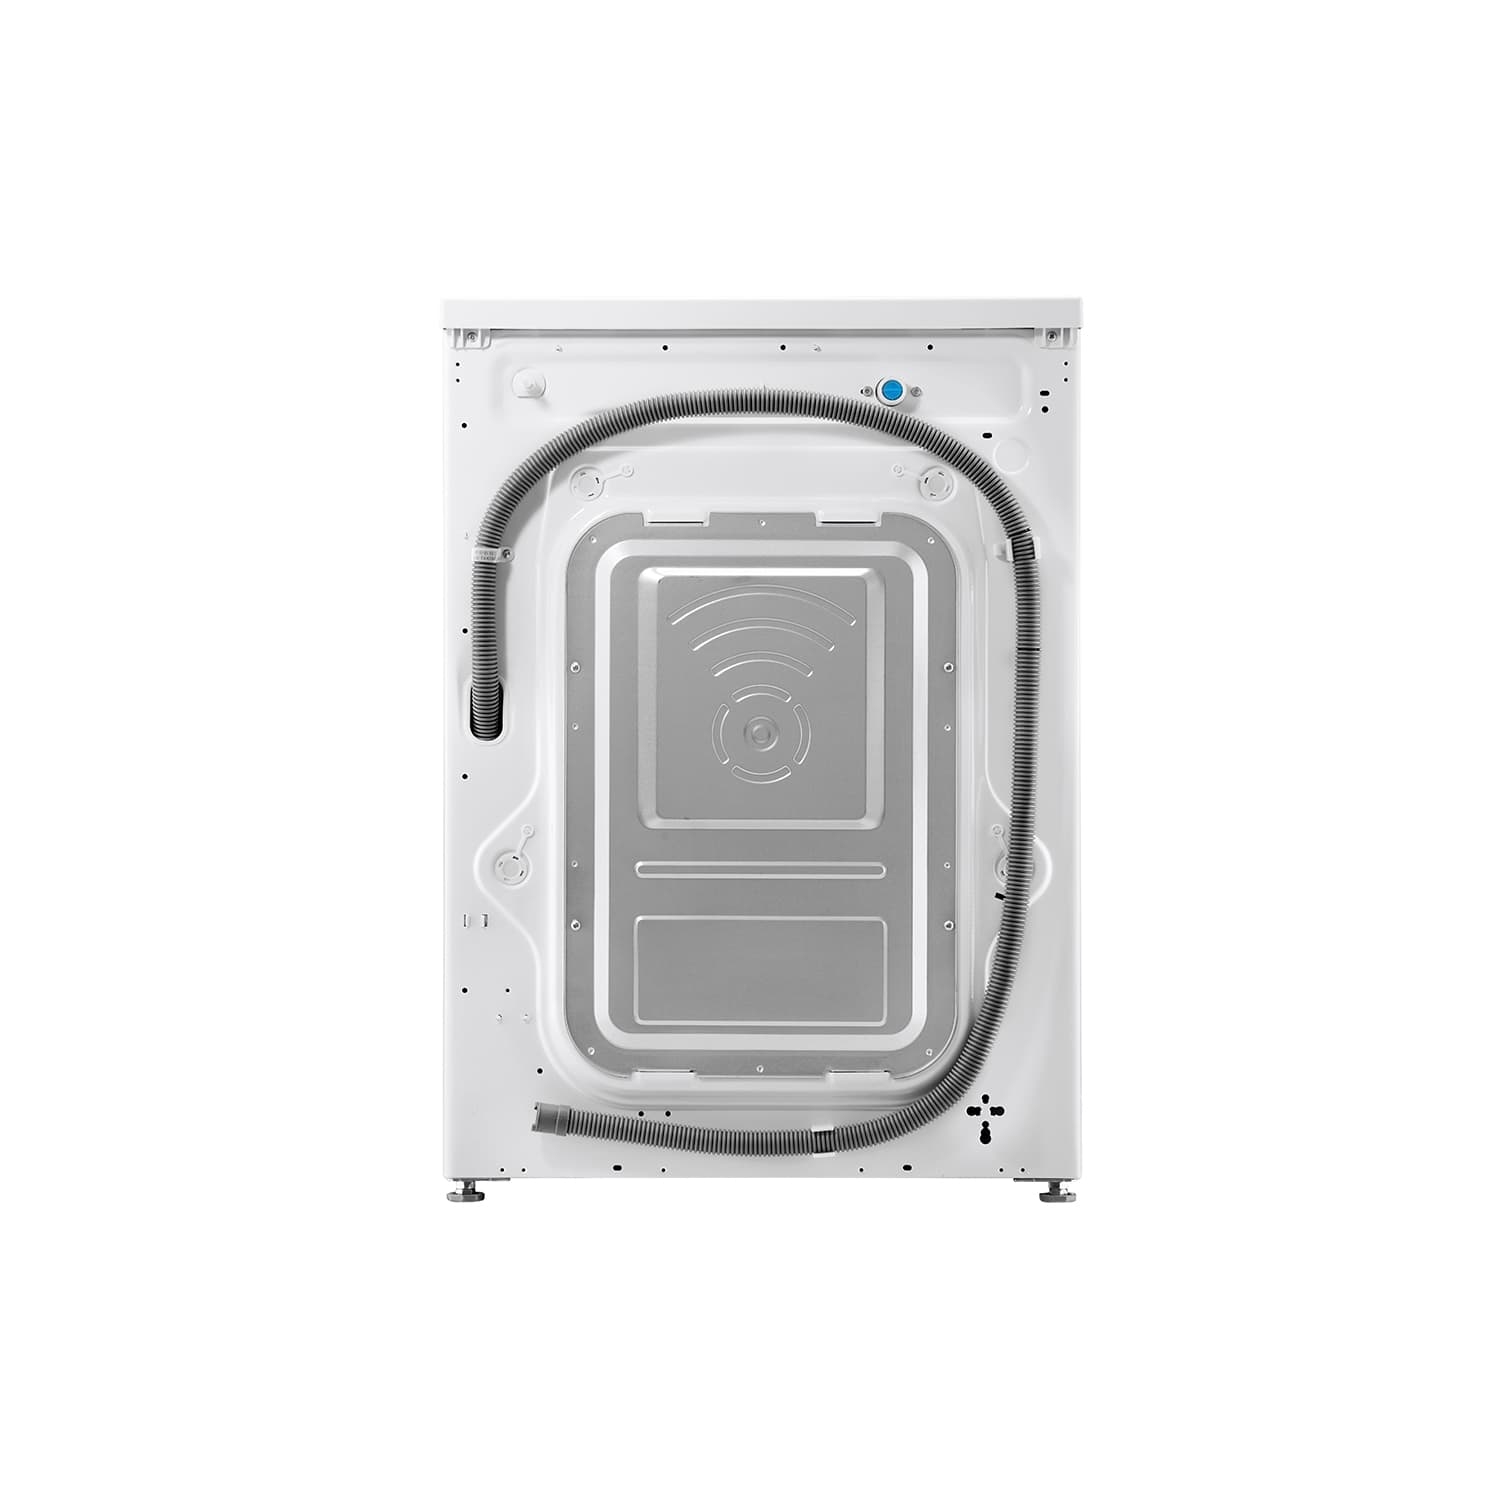 LG F4MT08WE 8kg 1400 Spin Washing Machine with 6 Motion Direct Drive - White - 6